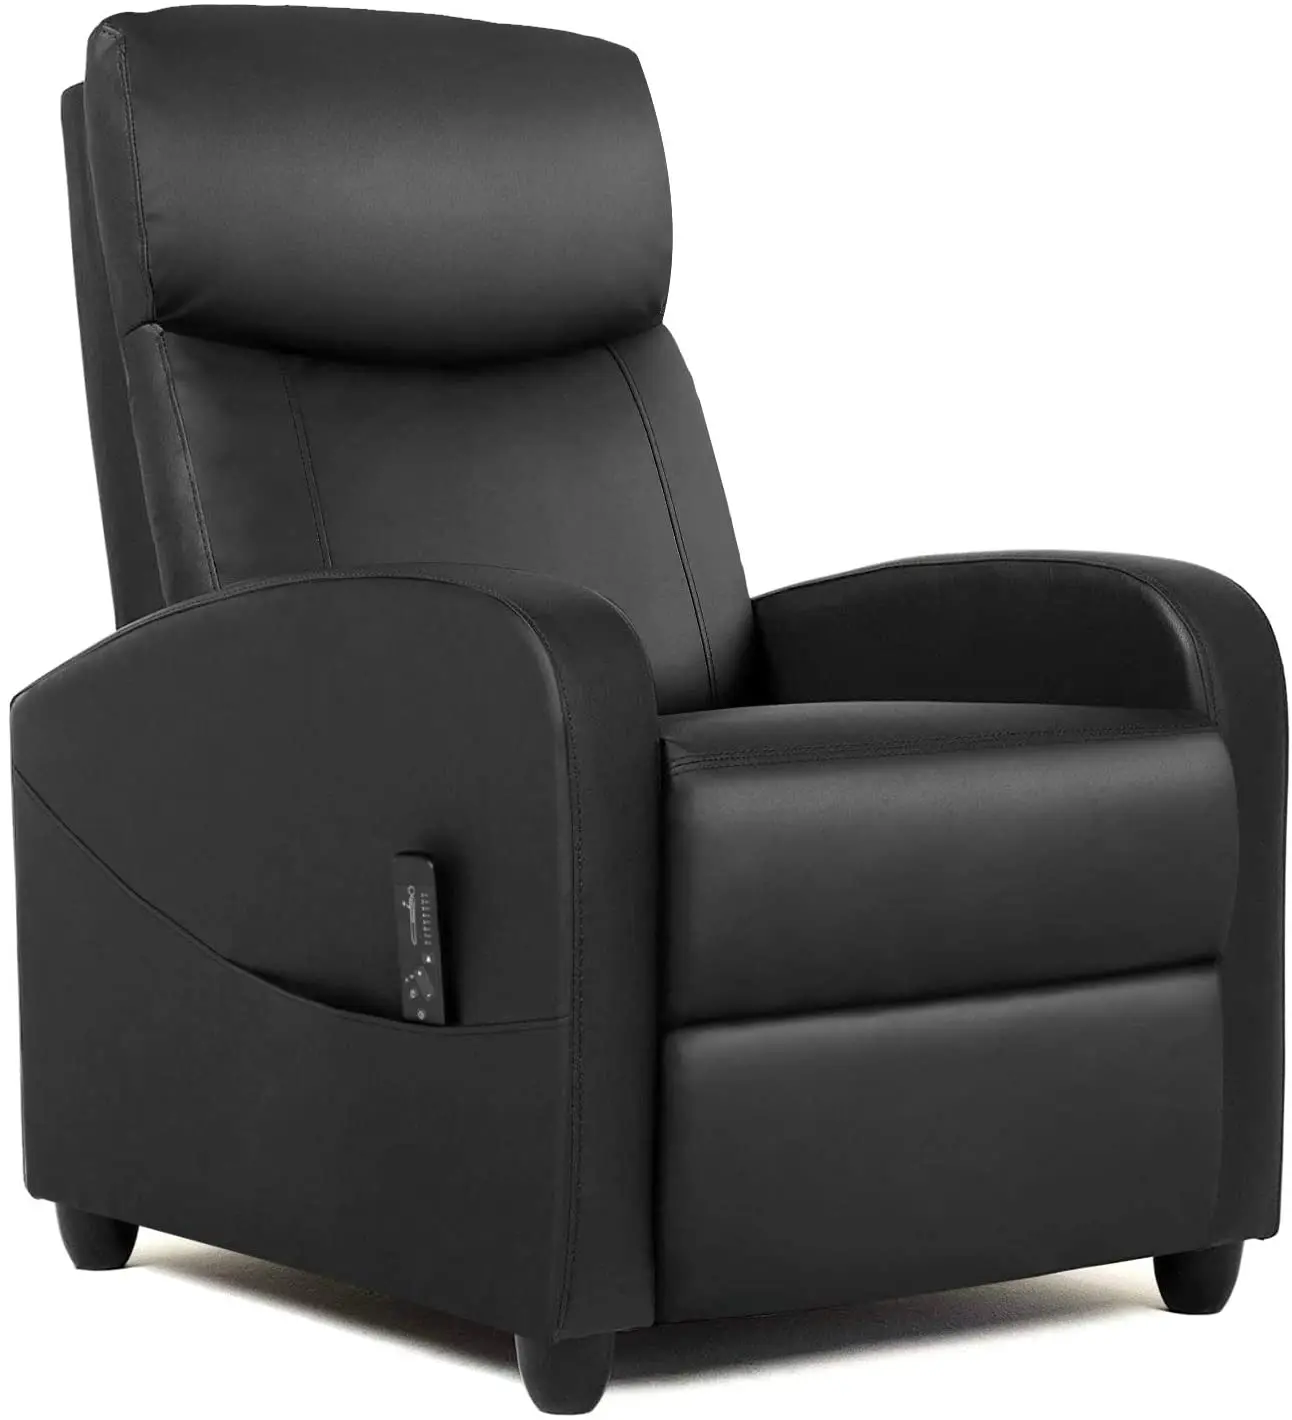 

JKY Adjustable Massage Recliner Chair Living Room Chair Home Theater Seating Winback Single Recliner Lazy Boy chair